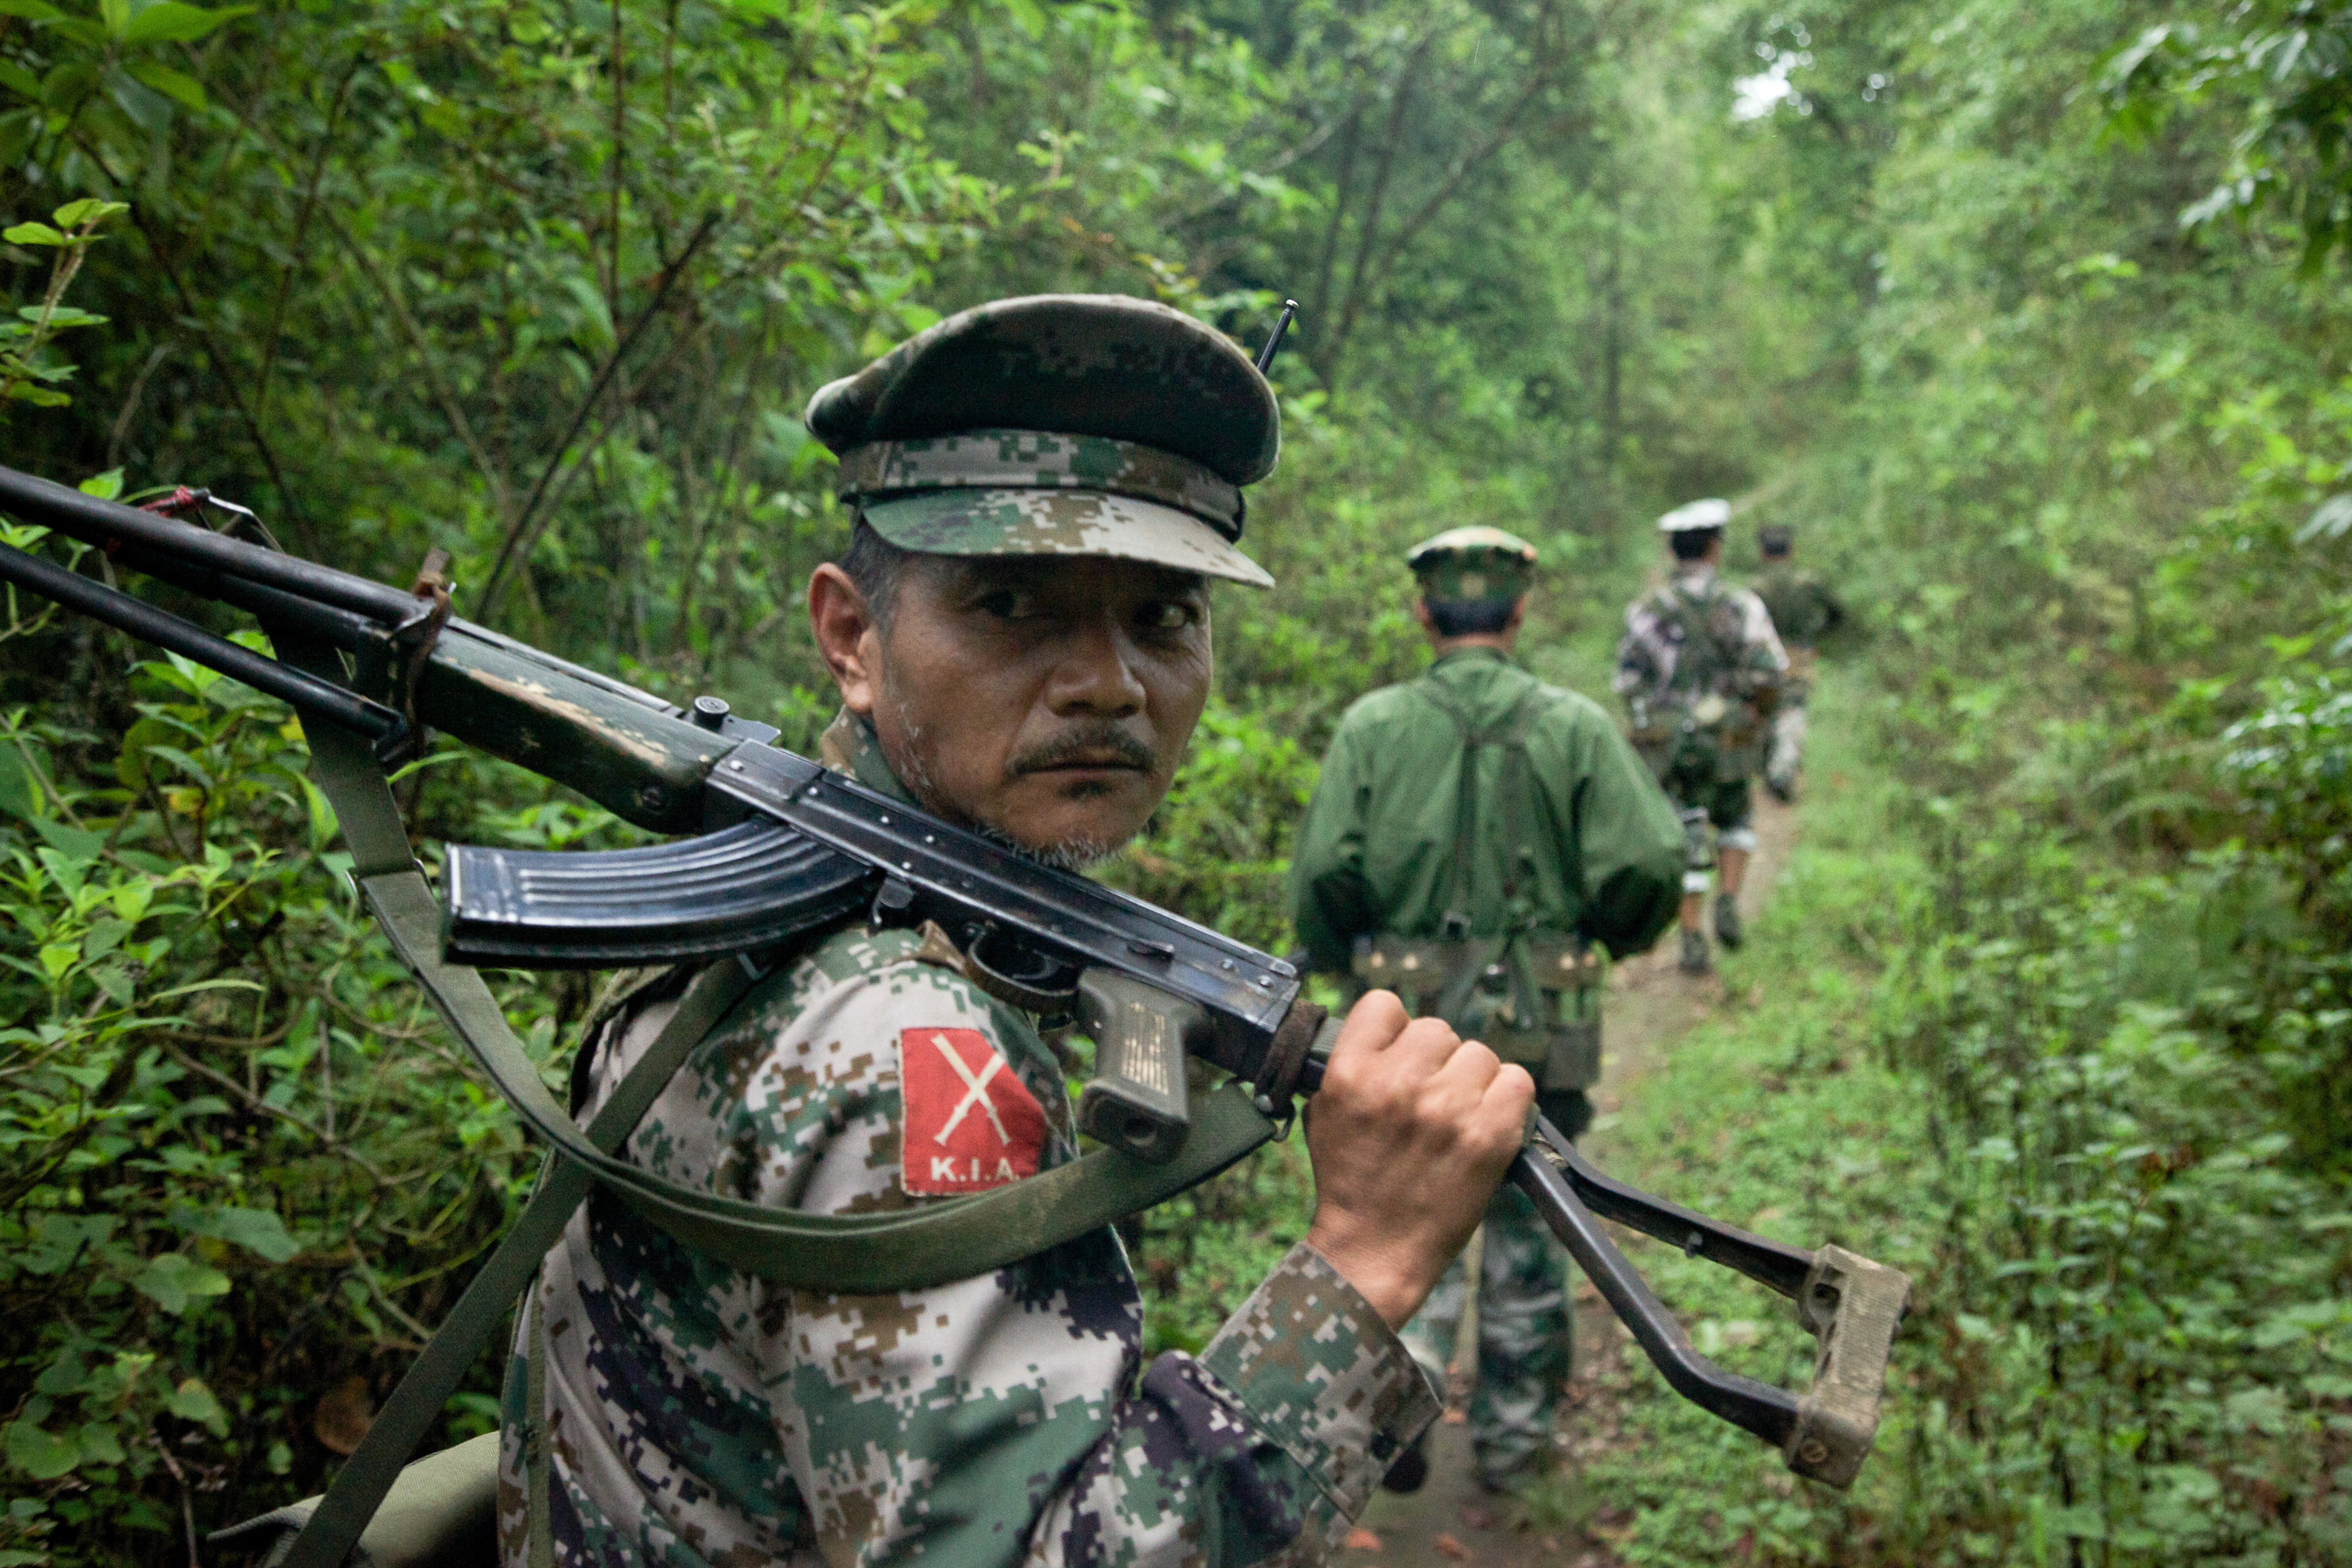 A Kachin Independence Army soldier patrols the frontline area on June 16, 2012. Fighting between the Myanmar army and KIA has escalated since early May, displacing 5,000 people in Kachin state. (Jason Motlagh—The Washington Post/Getty Images)